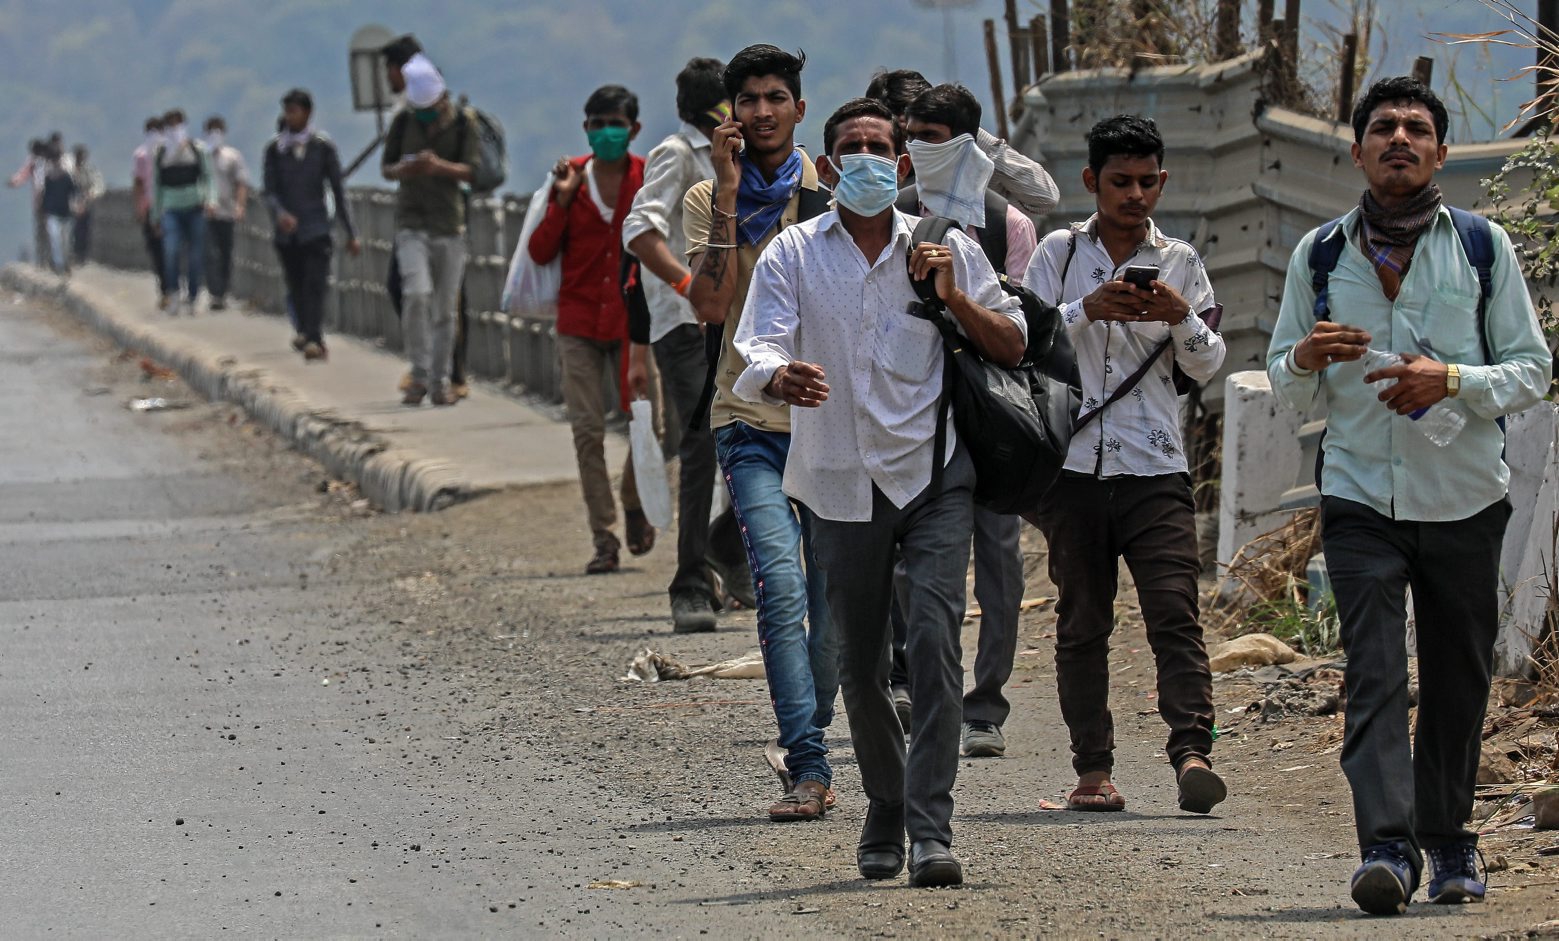 epa08326151 Indian Migrant labourers walk on the western express highway to reach Rajasthan for their villages, on the outskirts of Mumbai, India 27 March 2020. India is facing the third day of the 21-day national lockdown decreed by Prime Minister Narendra Modi in an effort to slow down the spread of the pandemic COVID-19 caused by the SARS-CoV-2 coronavirus. No work for 21 days means no income for thousands of migrant labourers and hundreds of them started walking to their villages on foot as no mode of transport is available. There have been at least 650 confirmed coronavirus infections and 10 deaths in India so far.  EPA/DIVYAKANT SOLANKI INDIA PANDEMIC CORONAVIRUS COVID-19